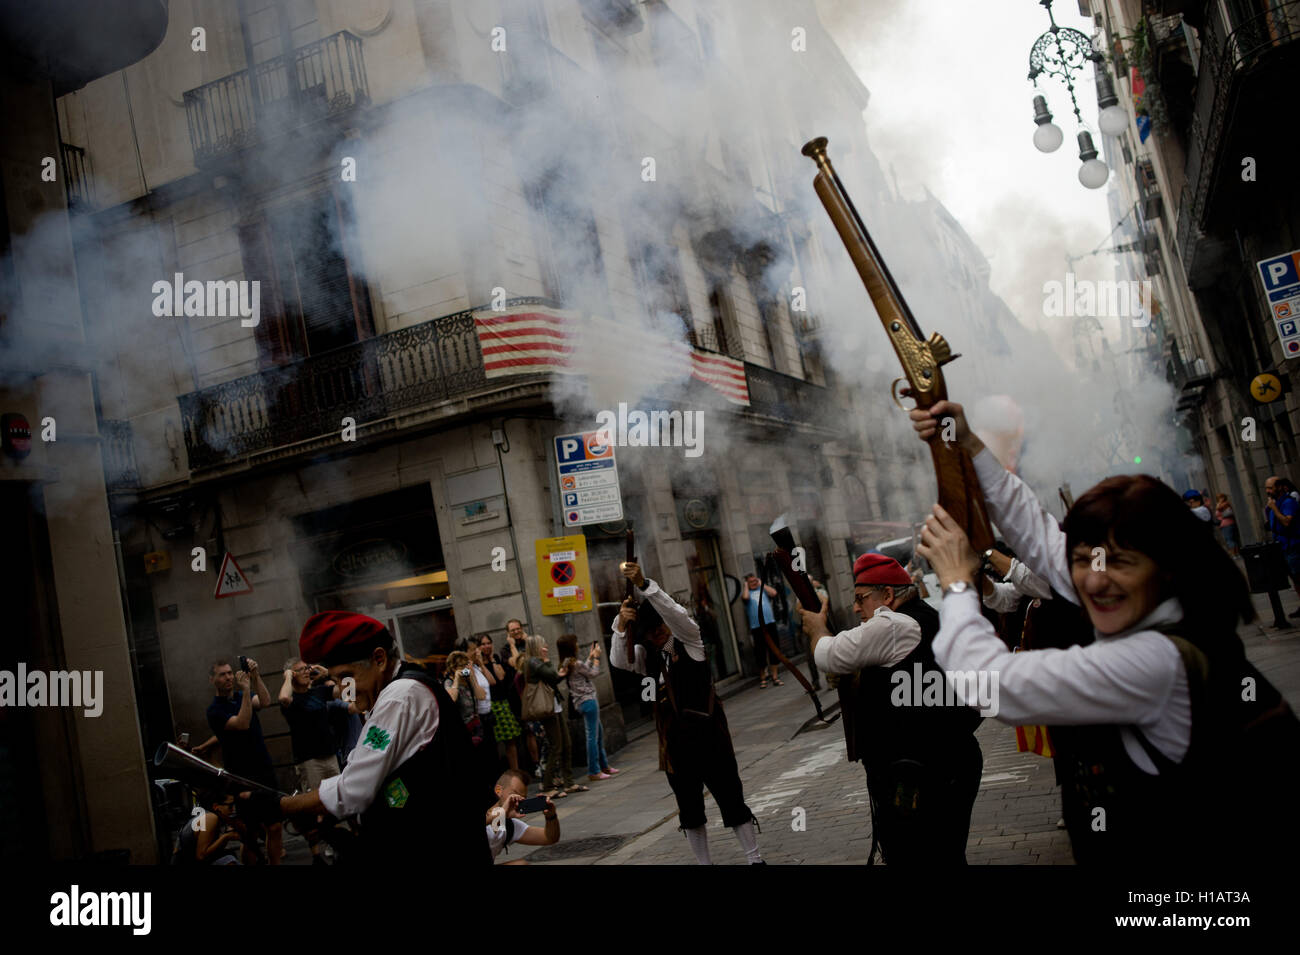 Barcelona, Catalonia, Spain. 24th Sep, 2016. Trabucaires shoot his blunderbuss early in the morning through the streets of Barcelona on the occasion of the celebrations of the Merce Festival (Festes de la Merce). The Galejada Trabucaire marks the beginning of the day of the patron saint of Barcelona, La Merce. Men and women dressed as ancient Catalan bandits take to the streets of the old part of Barcelona and cause a loud noise with his blunderbusses full of gunpowder. © Jordi Boixareu/ZUMA Wire/Alamy Live News Stock Photo